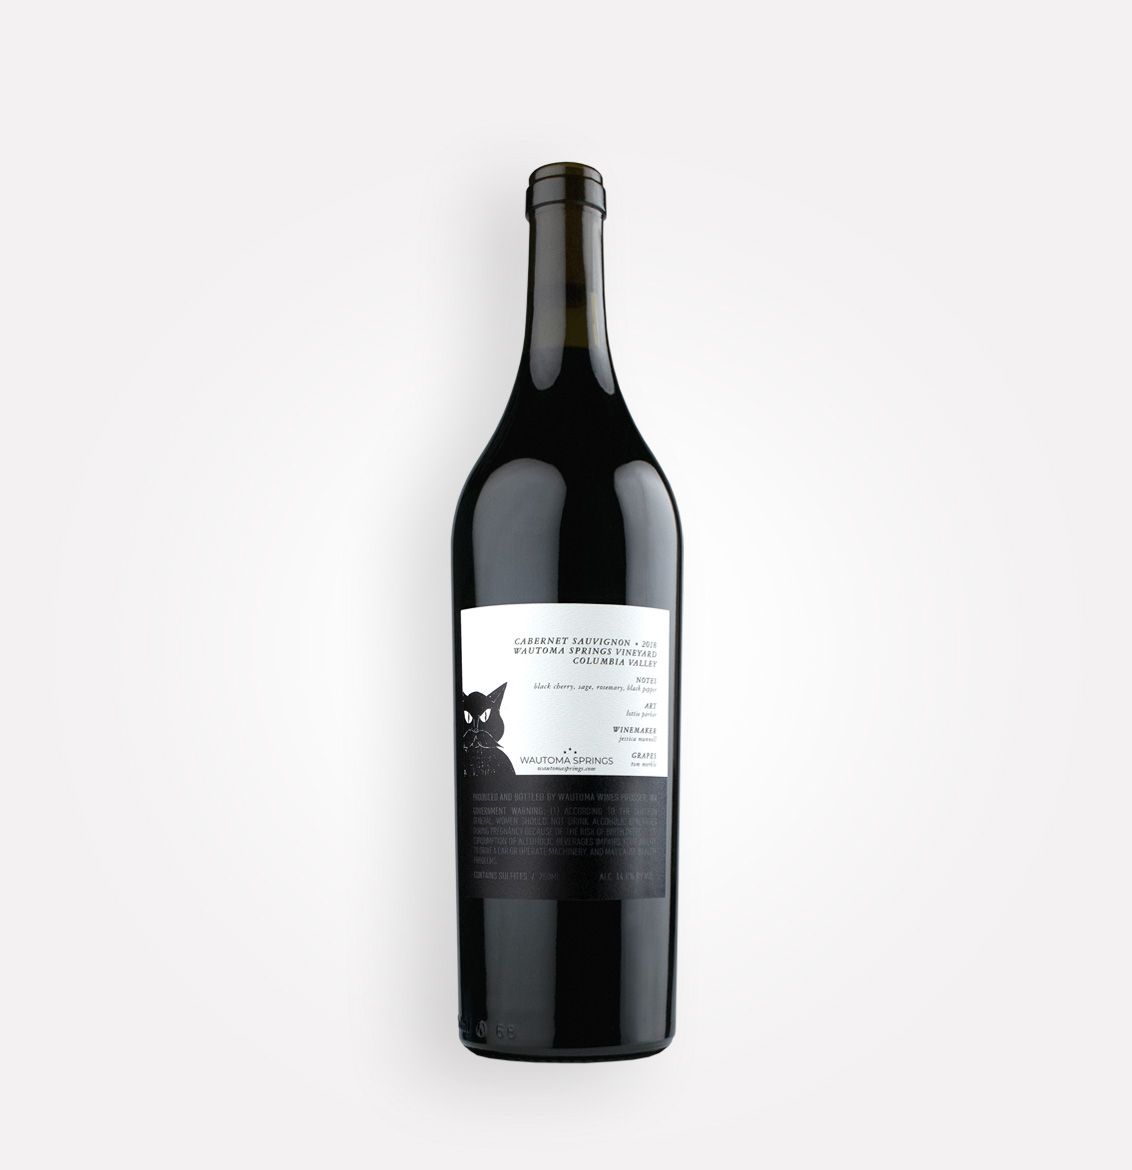 Back bottle view of Wautoma Springs 2018 The Behemoth Reserve Cabernet Sauvignon wine from Washington's Columbia Valley